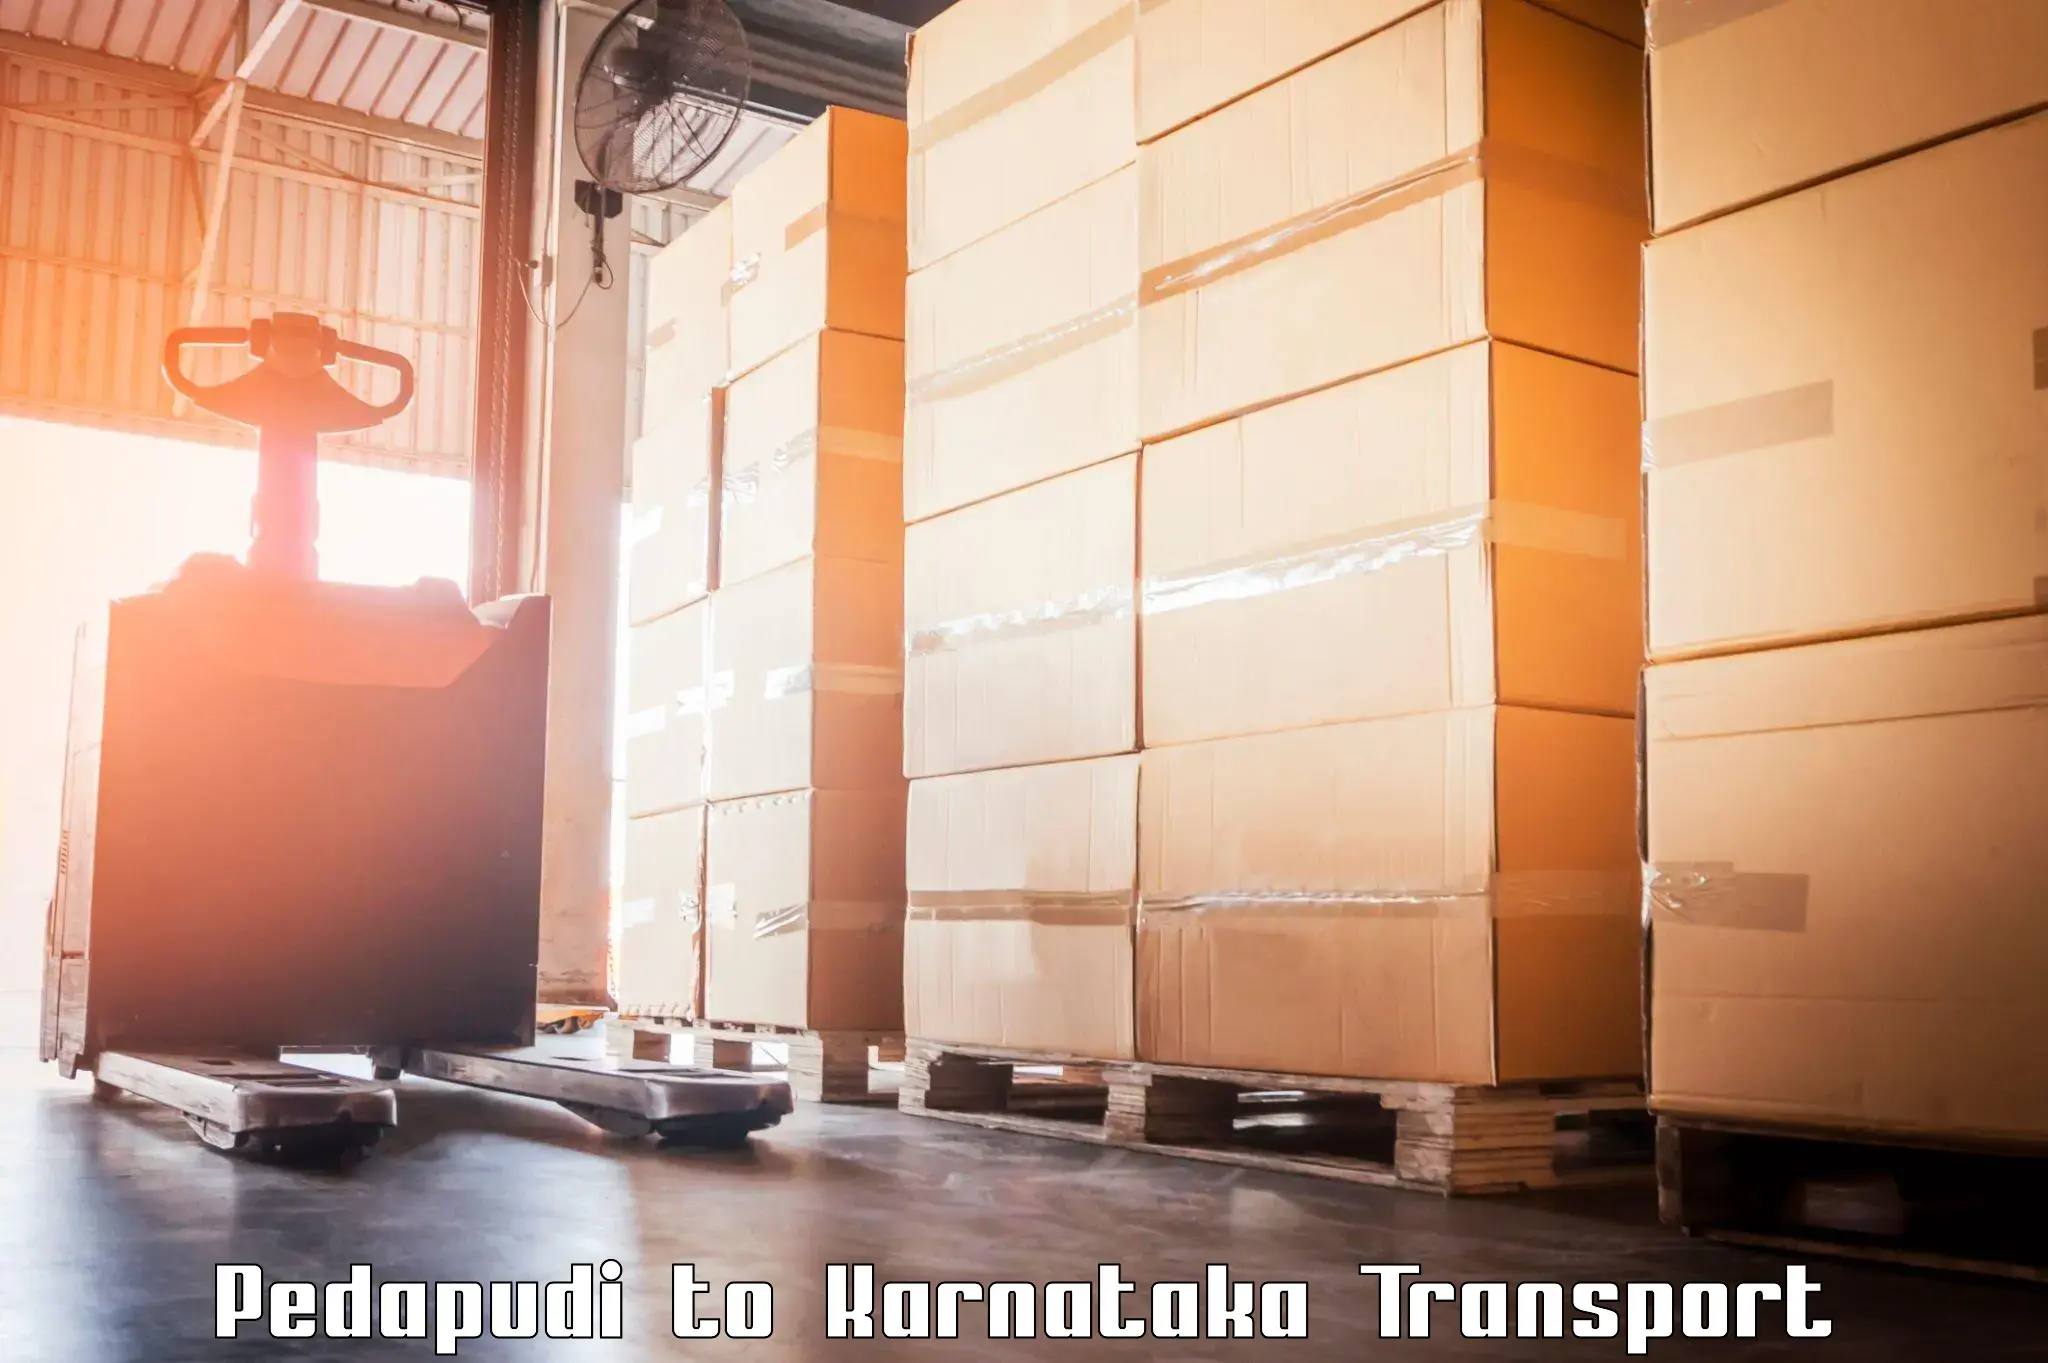 Vehicle transport services Pedapudi to Mangalore Port